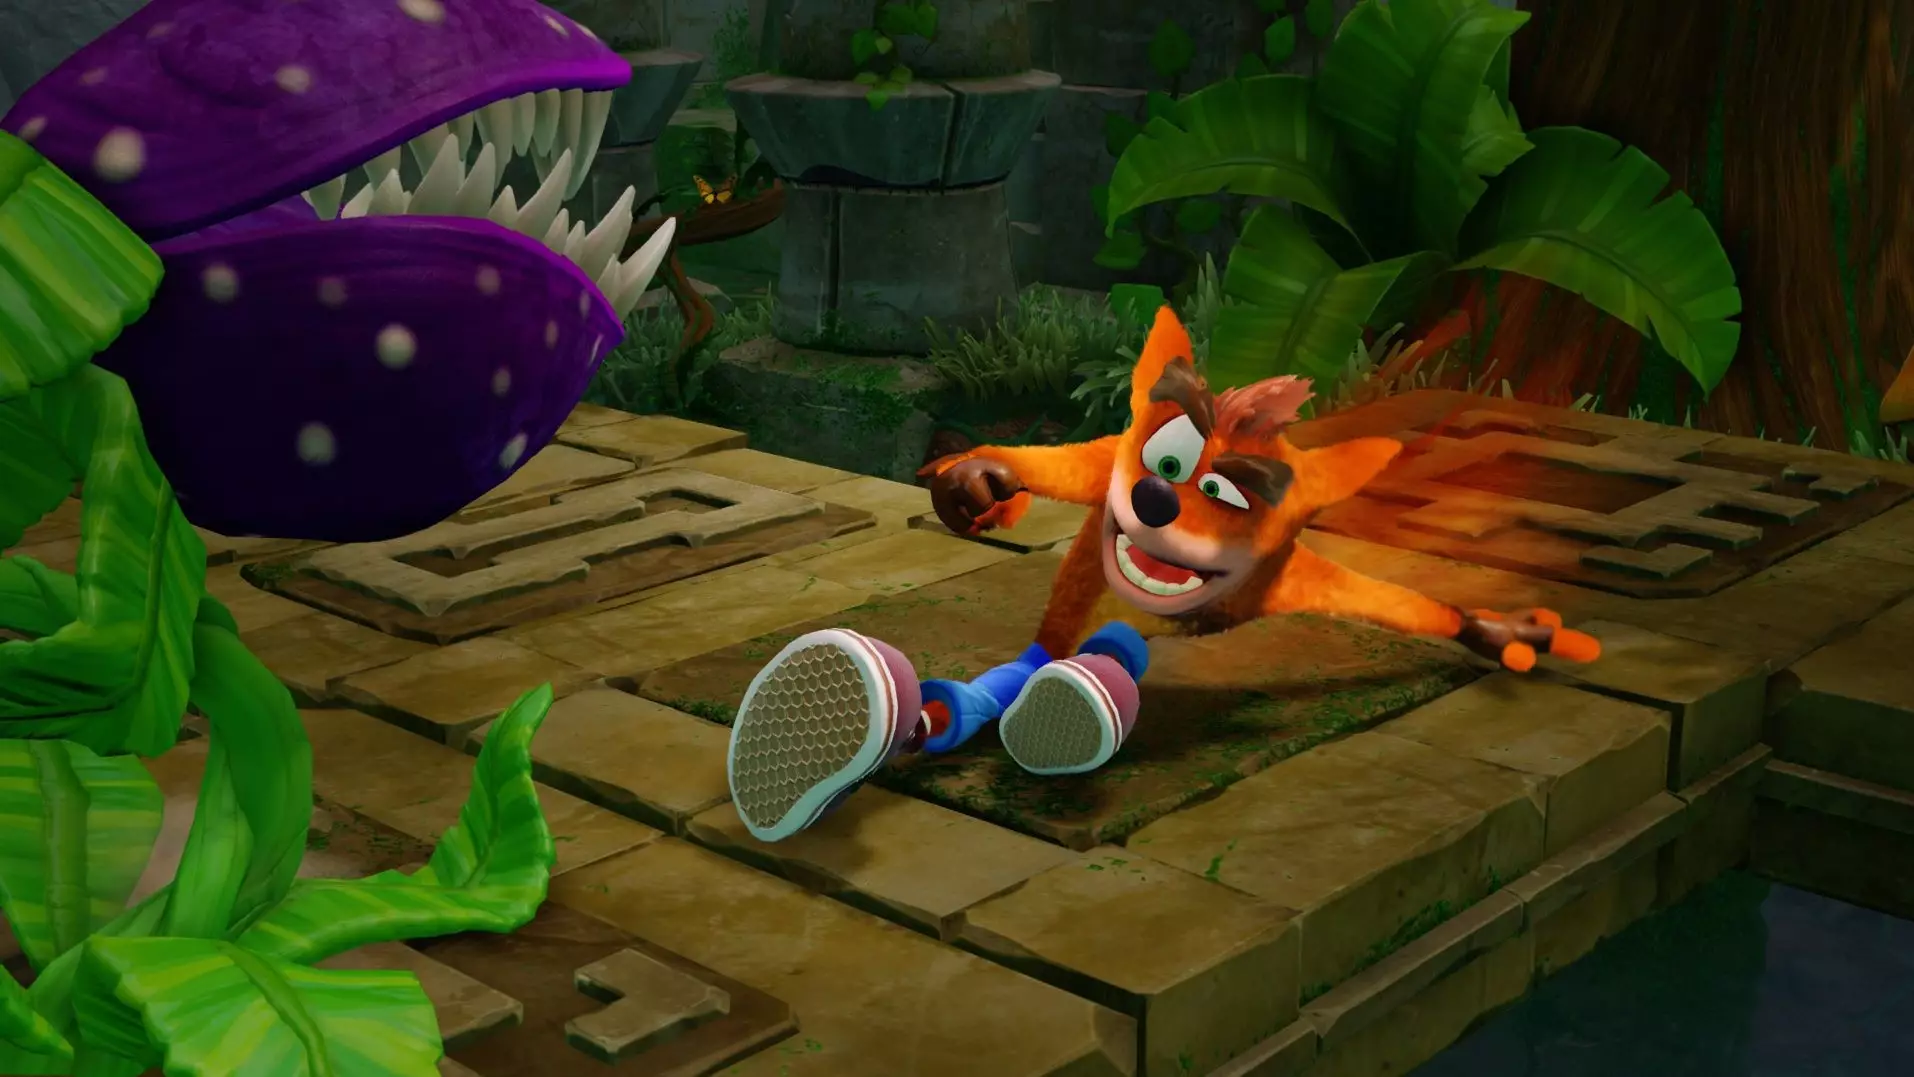 Crash Bandicoot Fastest Selling Switch Game In 2018